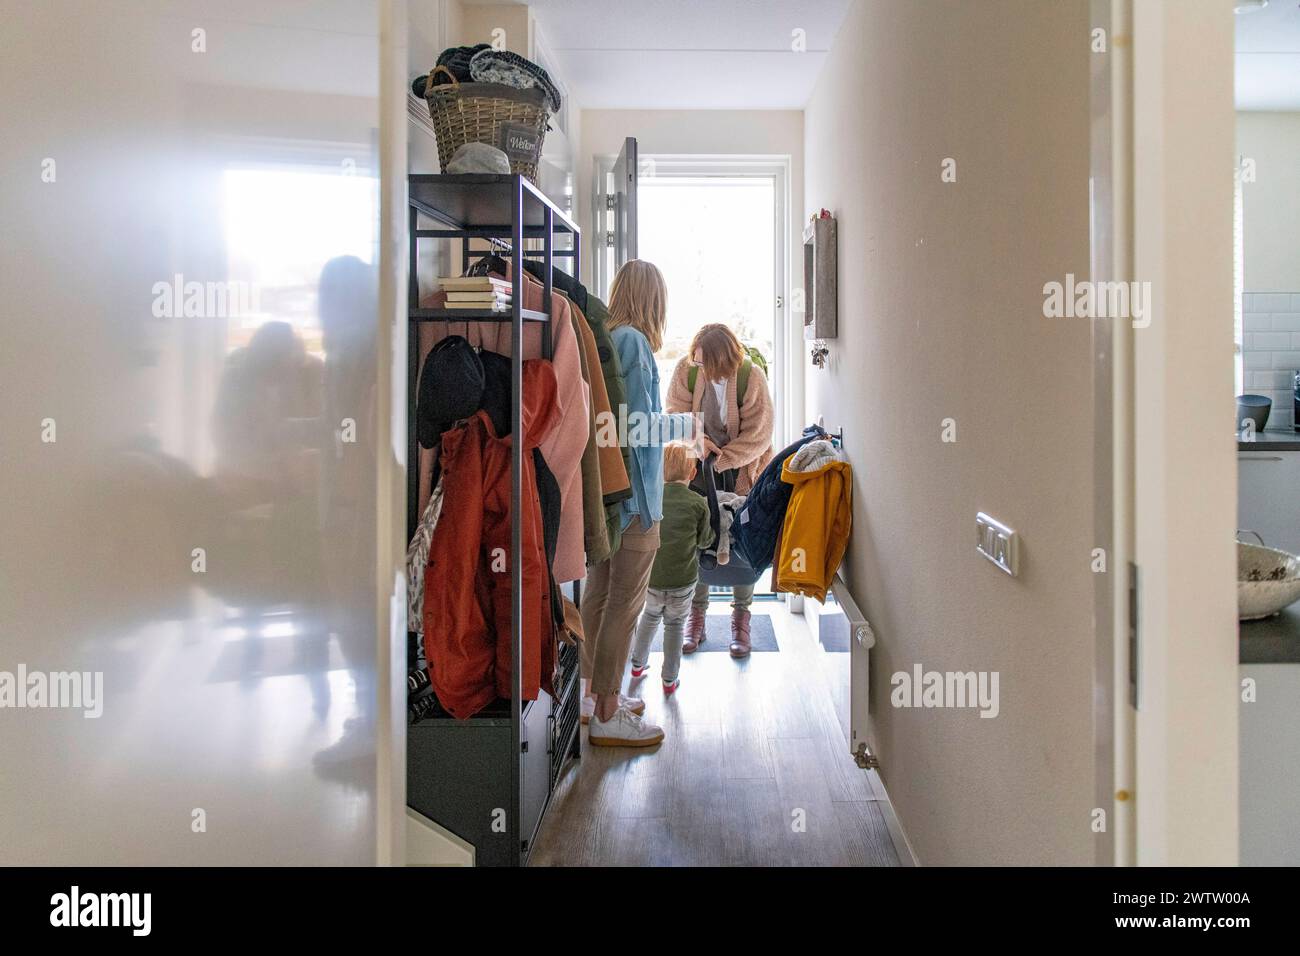 Family moment as they get ready to leave the house Stock Photo